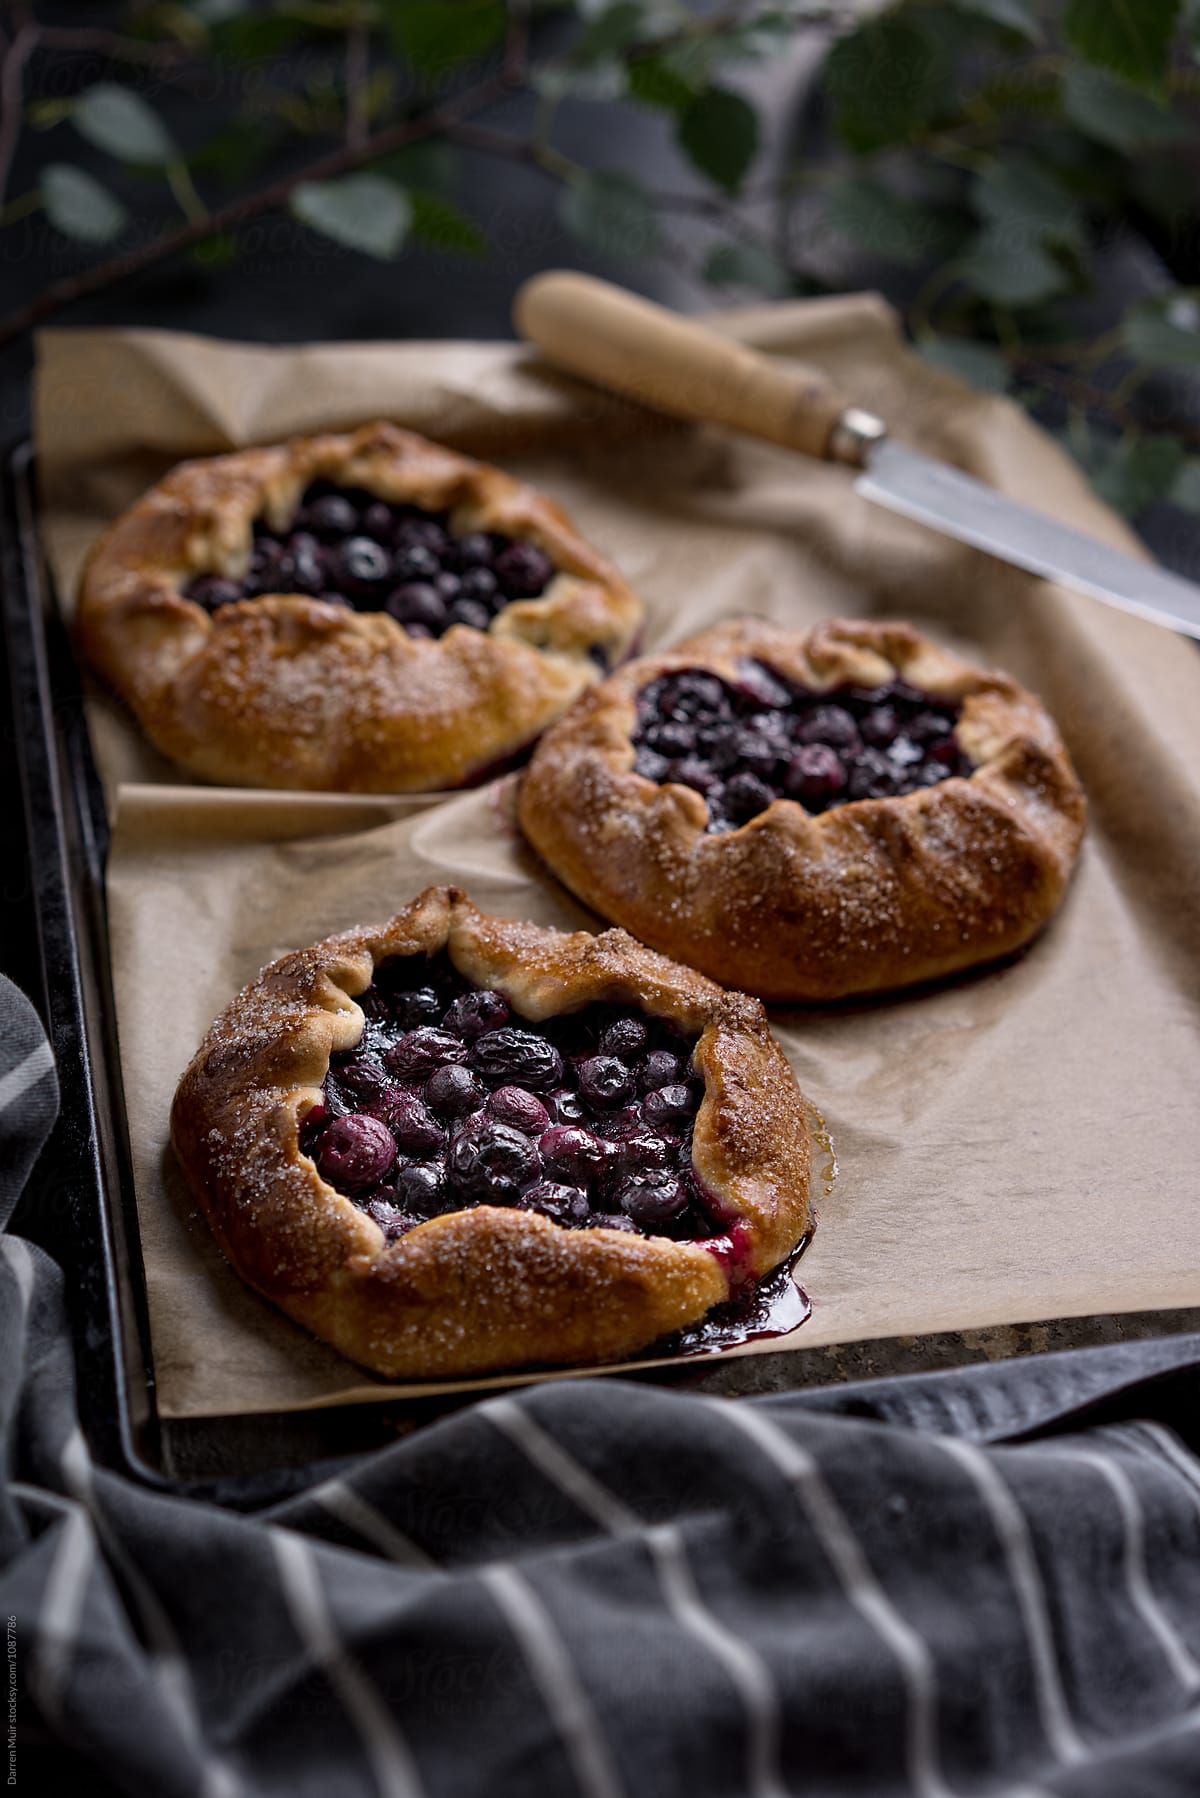 Blueberry pies. Freshly baked blueberry galettes on a baking tray.